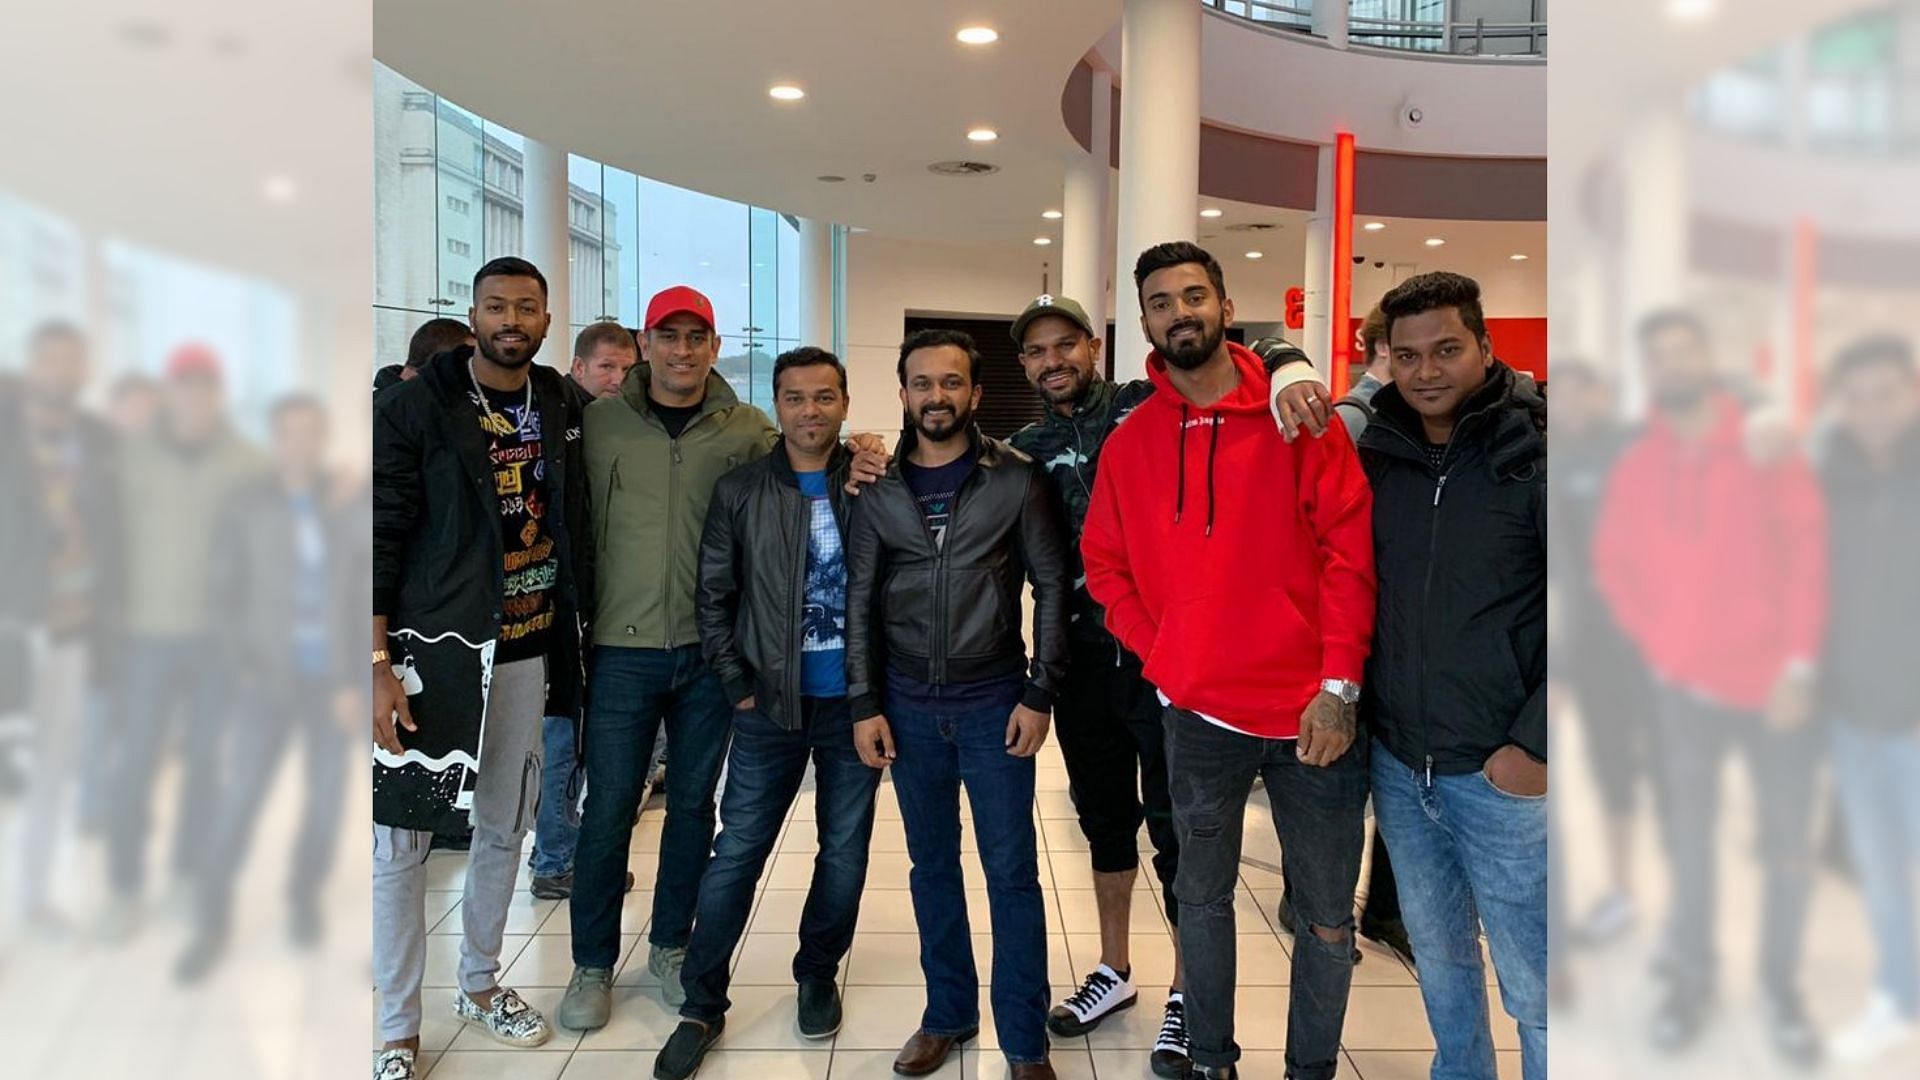 Members of Indian cricket team watched Salman-starrer ‘Bharat’ between World Cup matches.